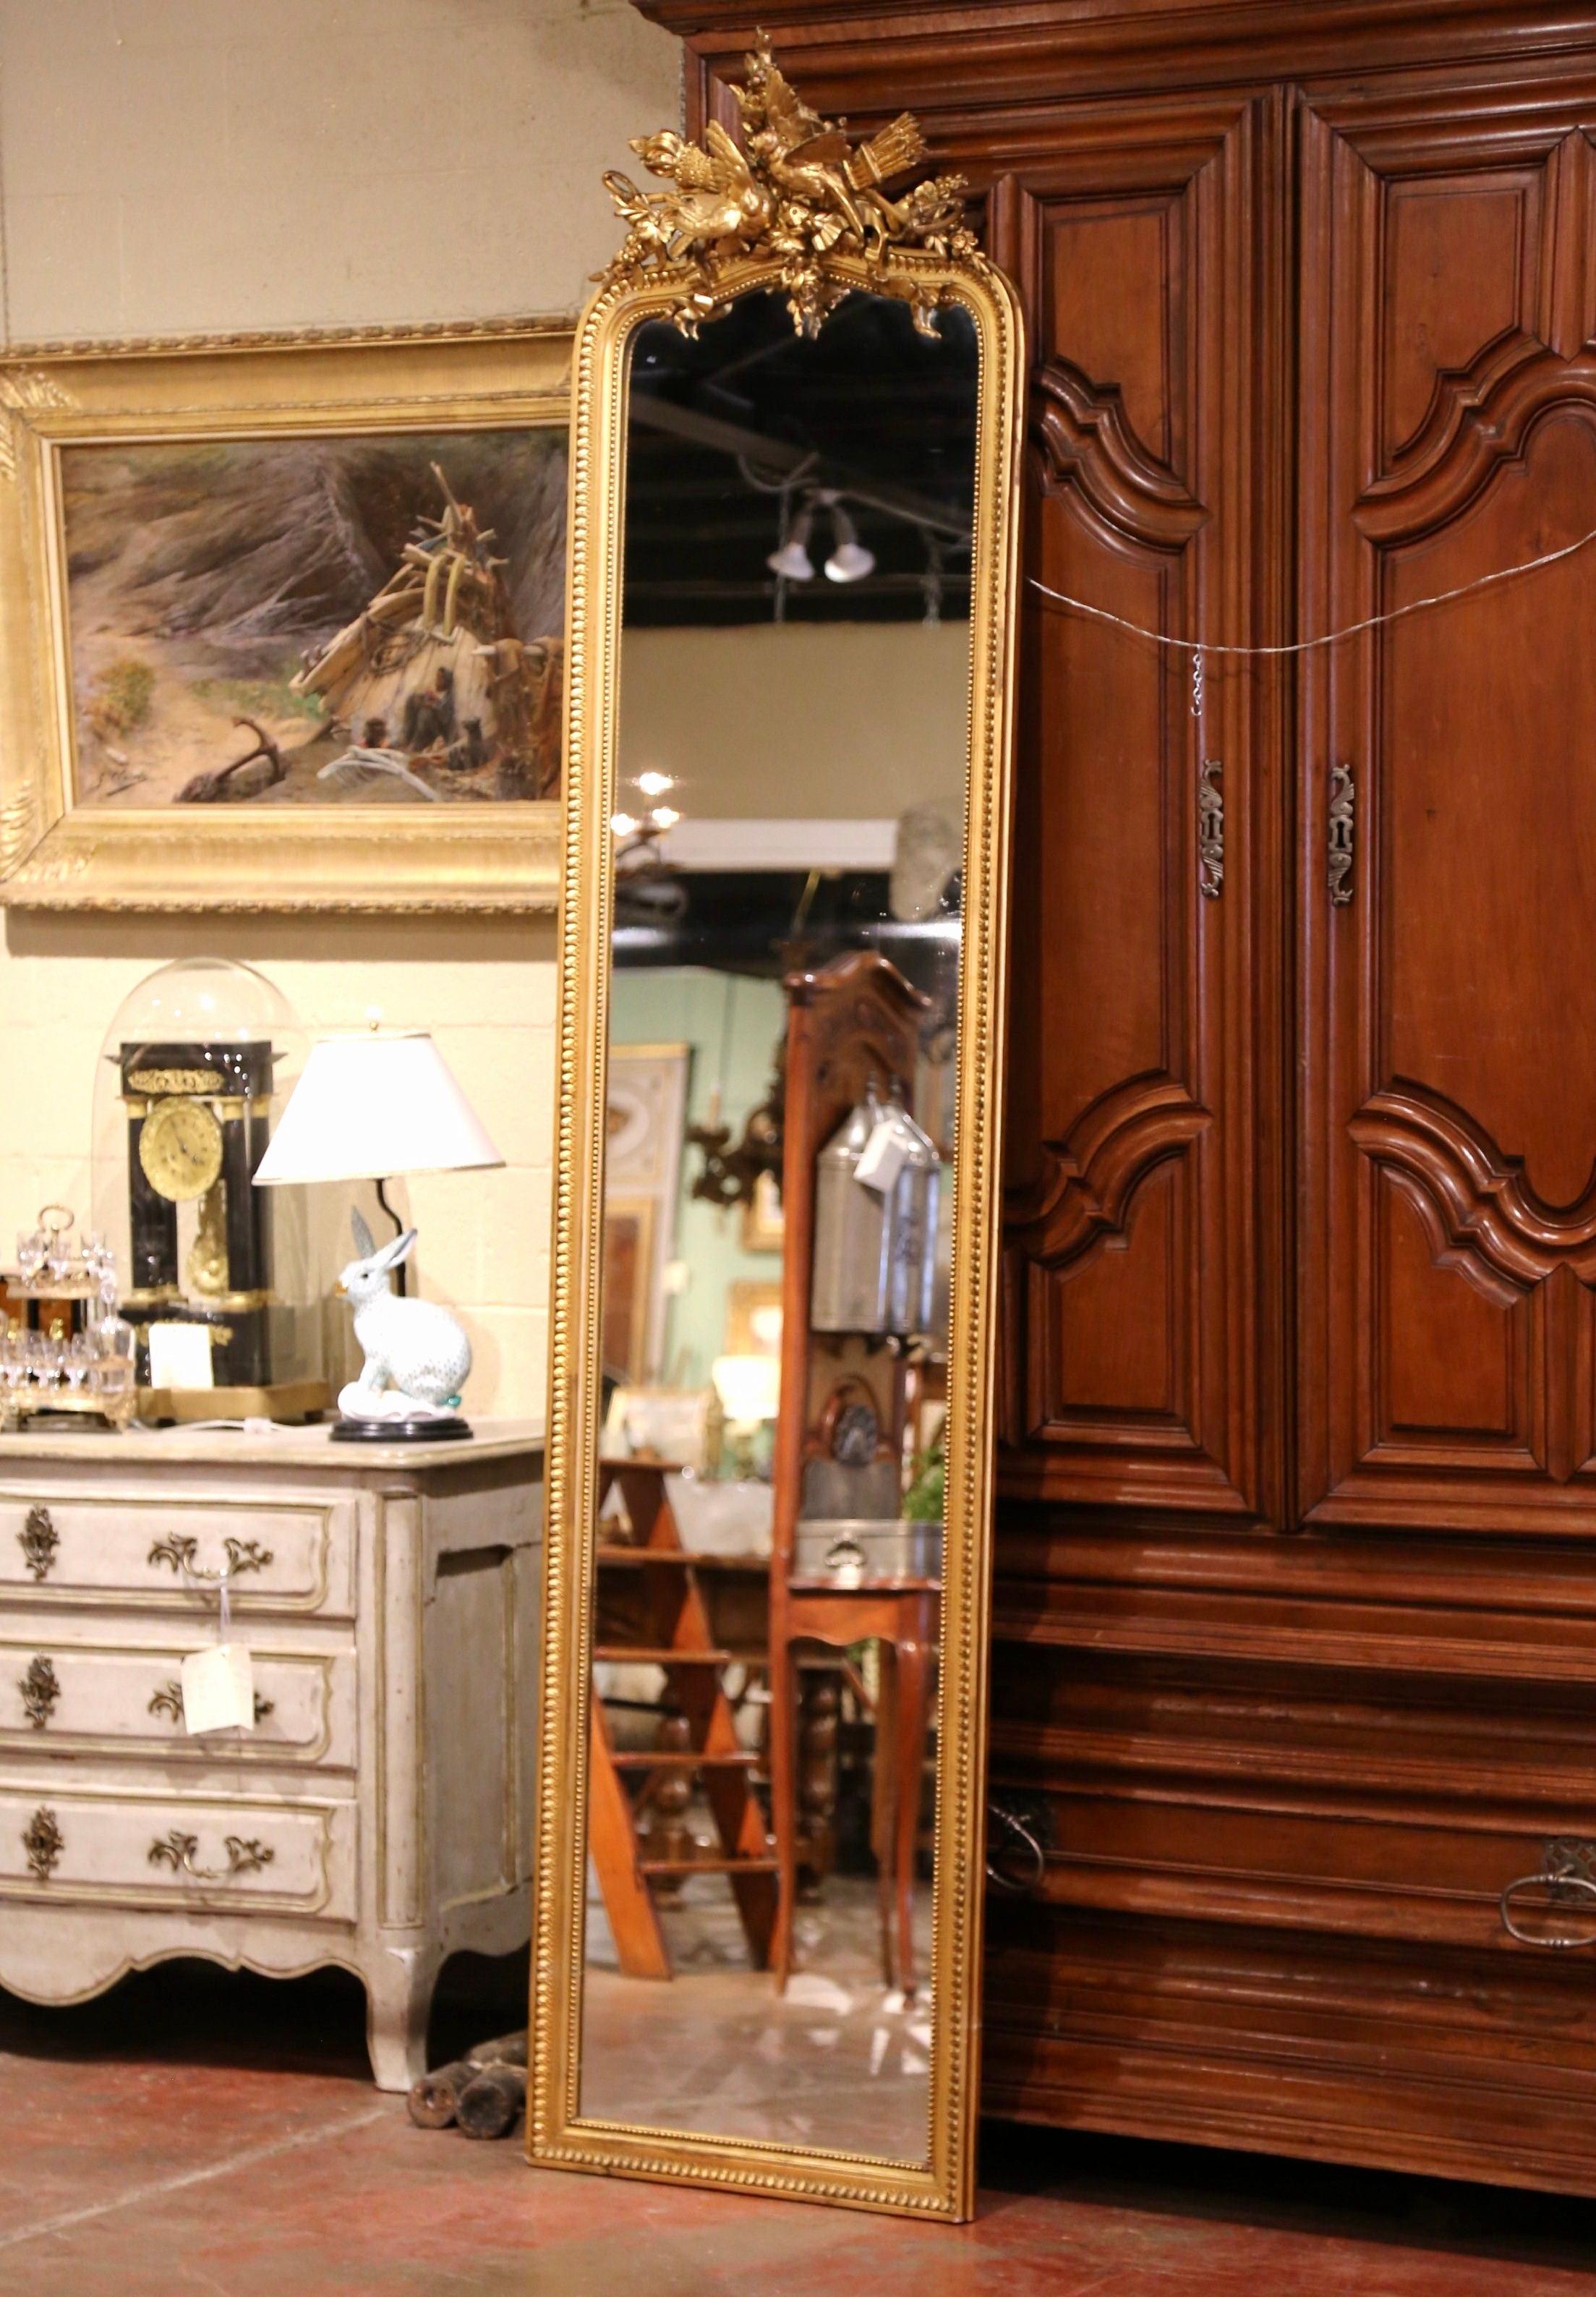 Almost 9 feet tall, this monumental antique mirror is a one of a kind! Crafted in Paris, France circa 1870, the floor mirror with arched top is decorated with high relief hand carved bird sculptures at the pediment, and embellished with floral